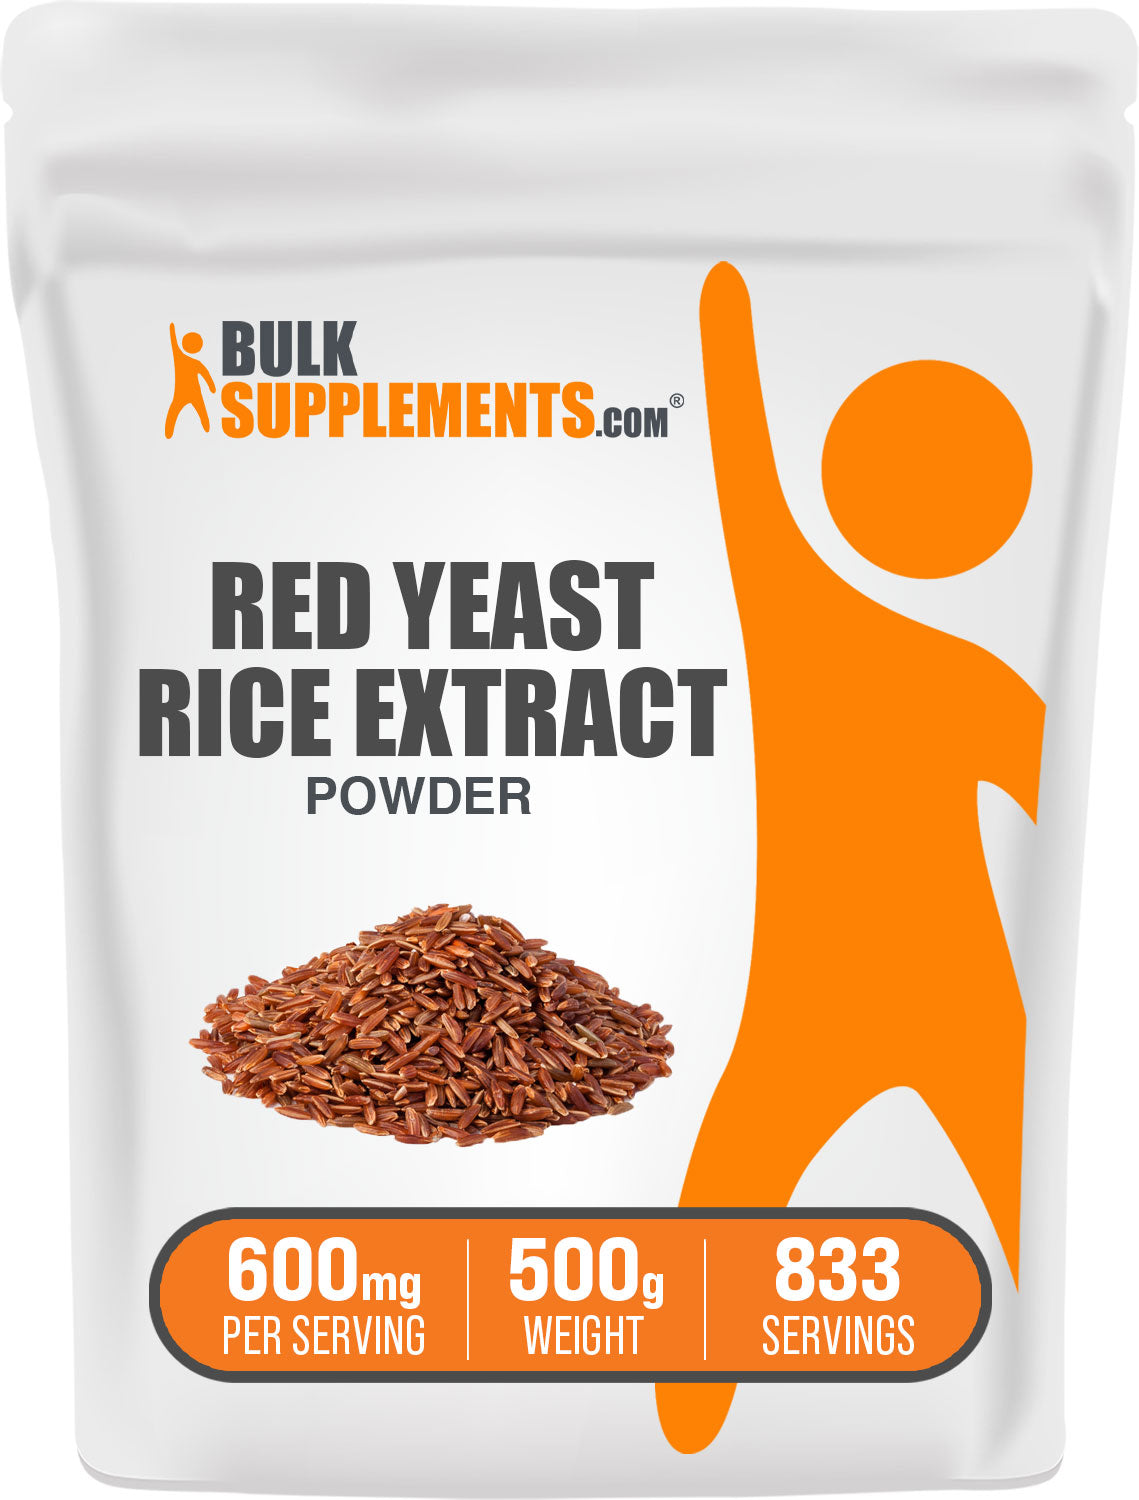 BulkSupplements.com Red Yeast Rice Extract Powder 500g bag